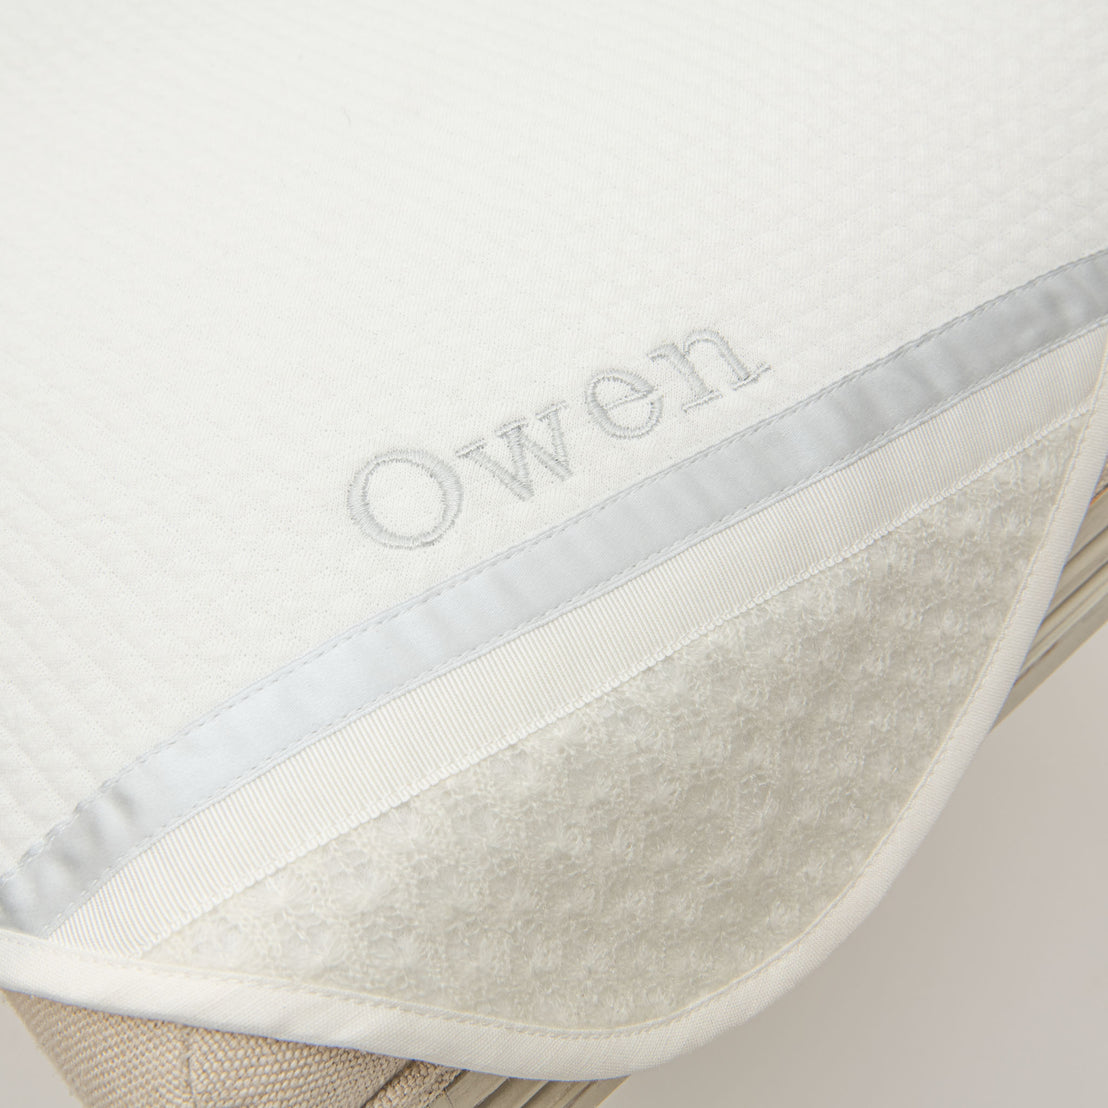 Closeup photo of the corner of the Owen Personalized Blanket. The corner features an ivory knit and the name "Owen" embroidered with light blue thread